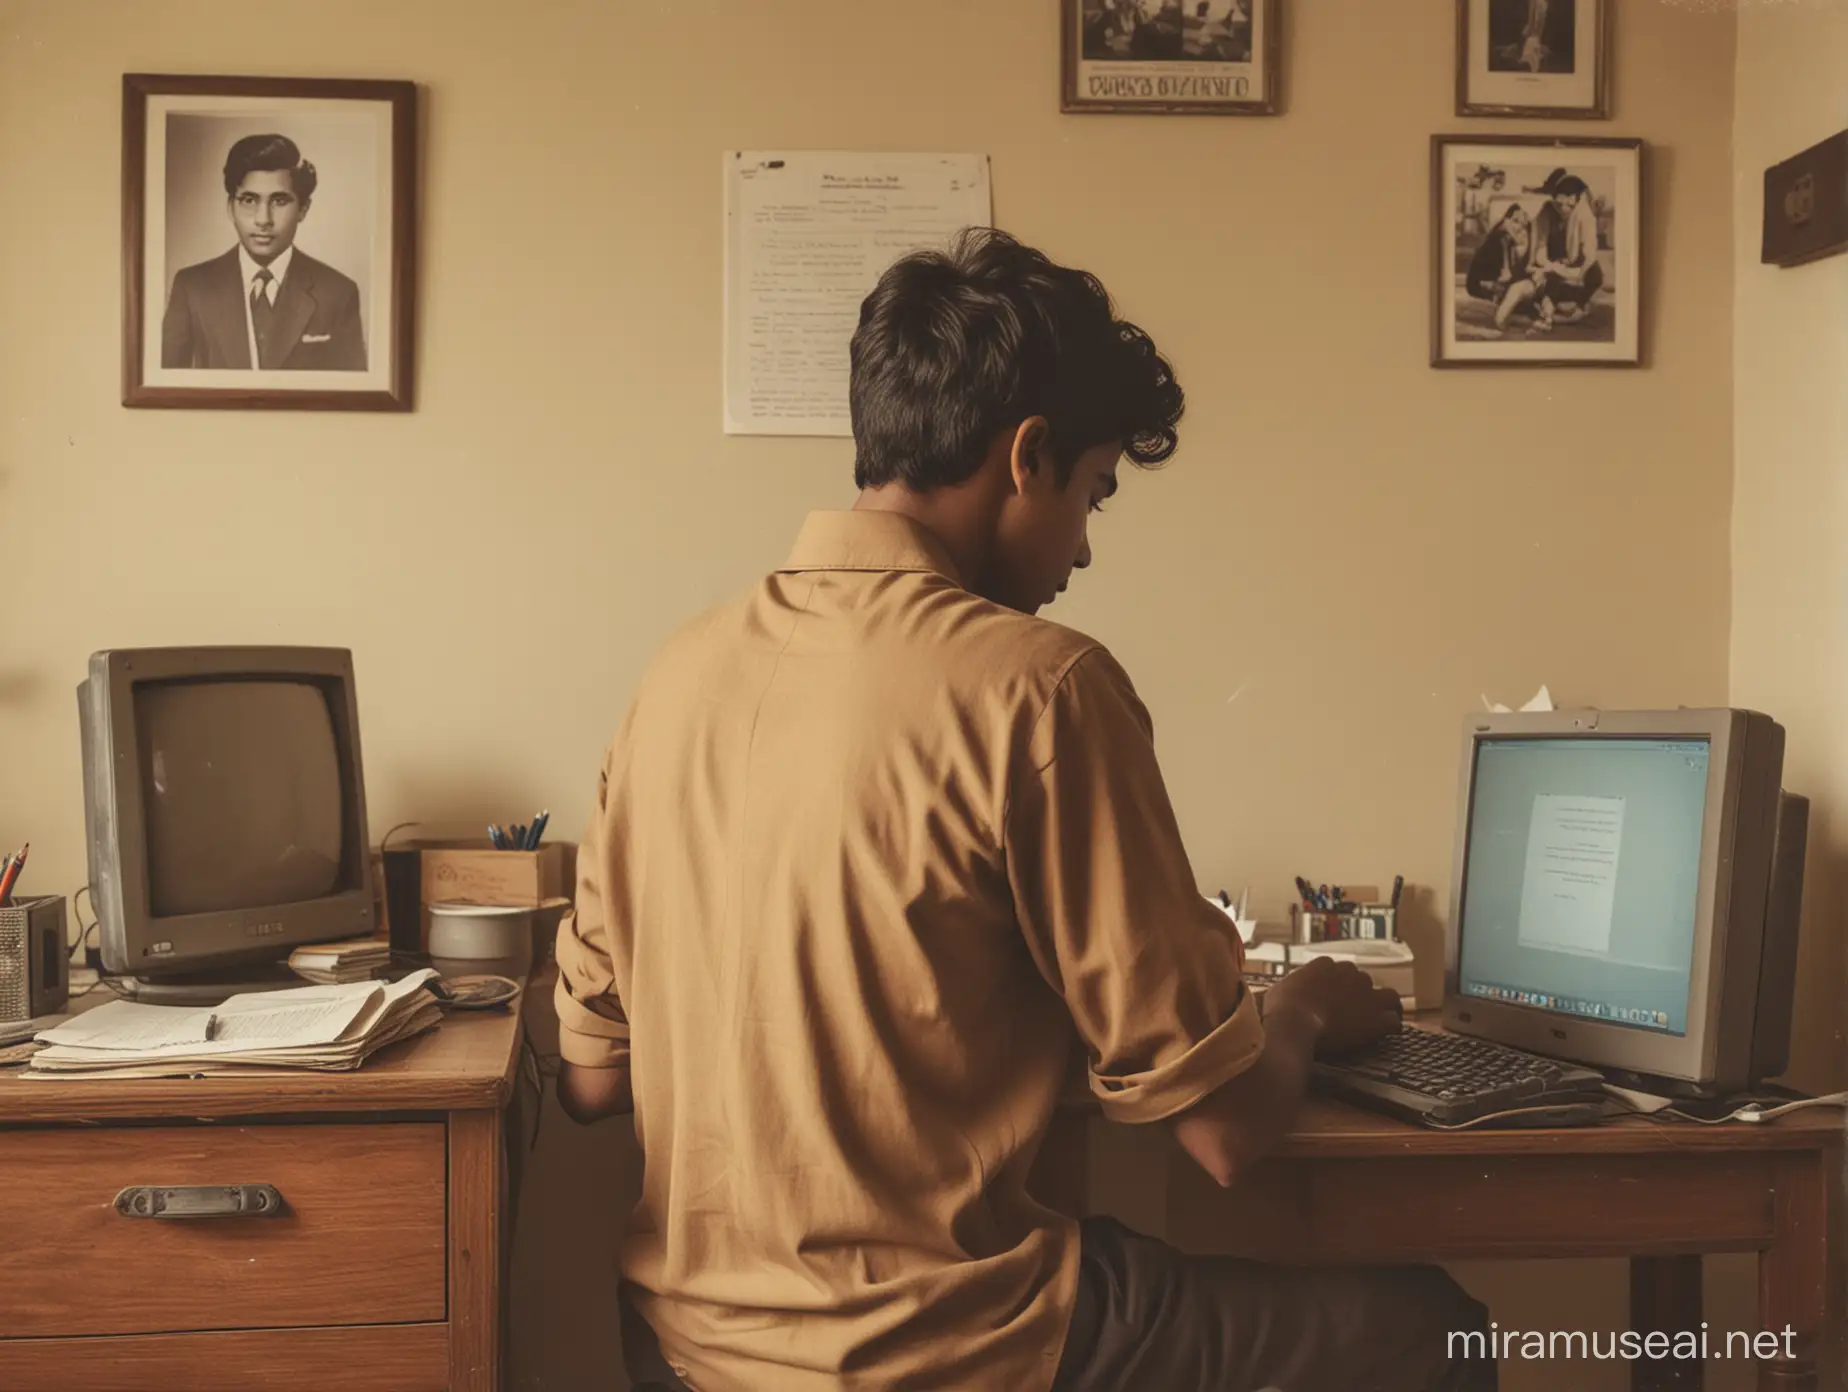 Indian Youth Writing on Vintage Computer in Room